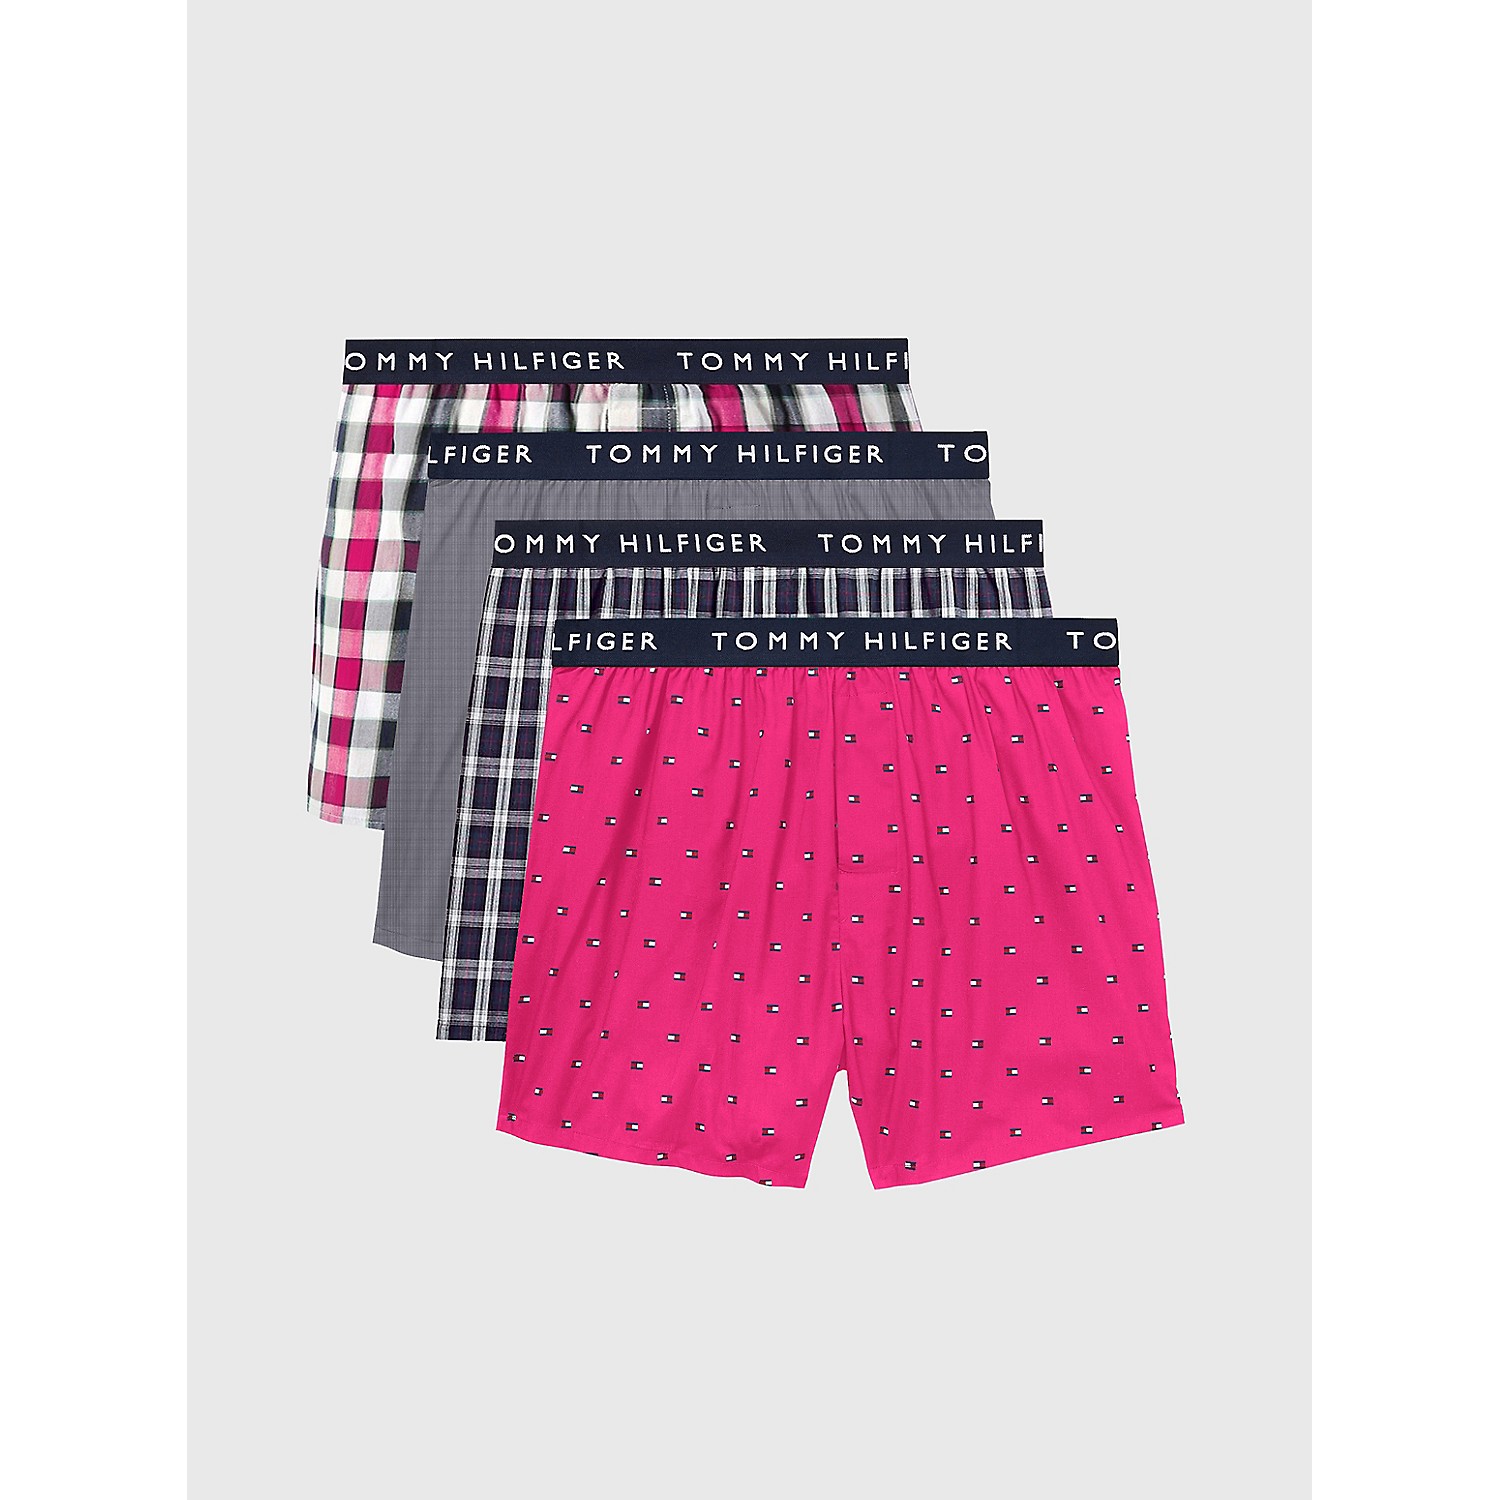 TOMMY HILFIGER Woven Cotton Boxer 4-Pack